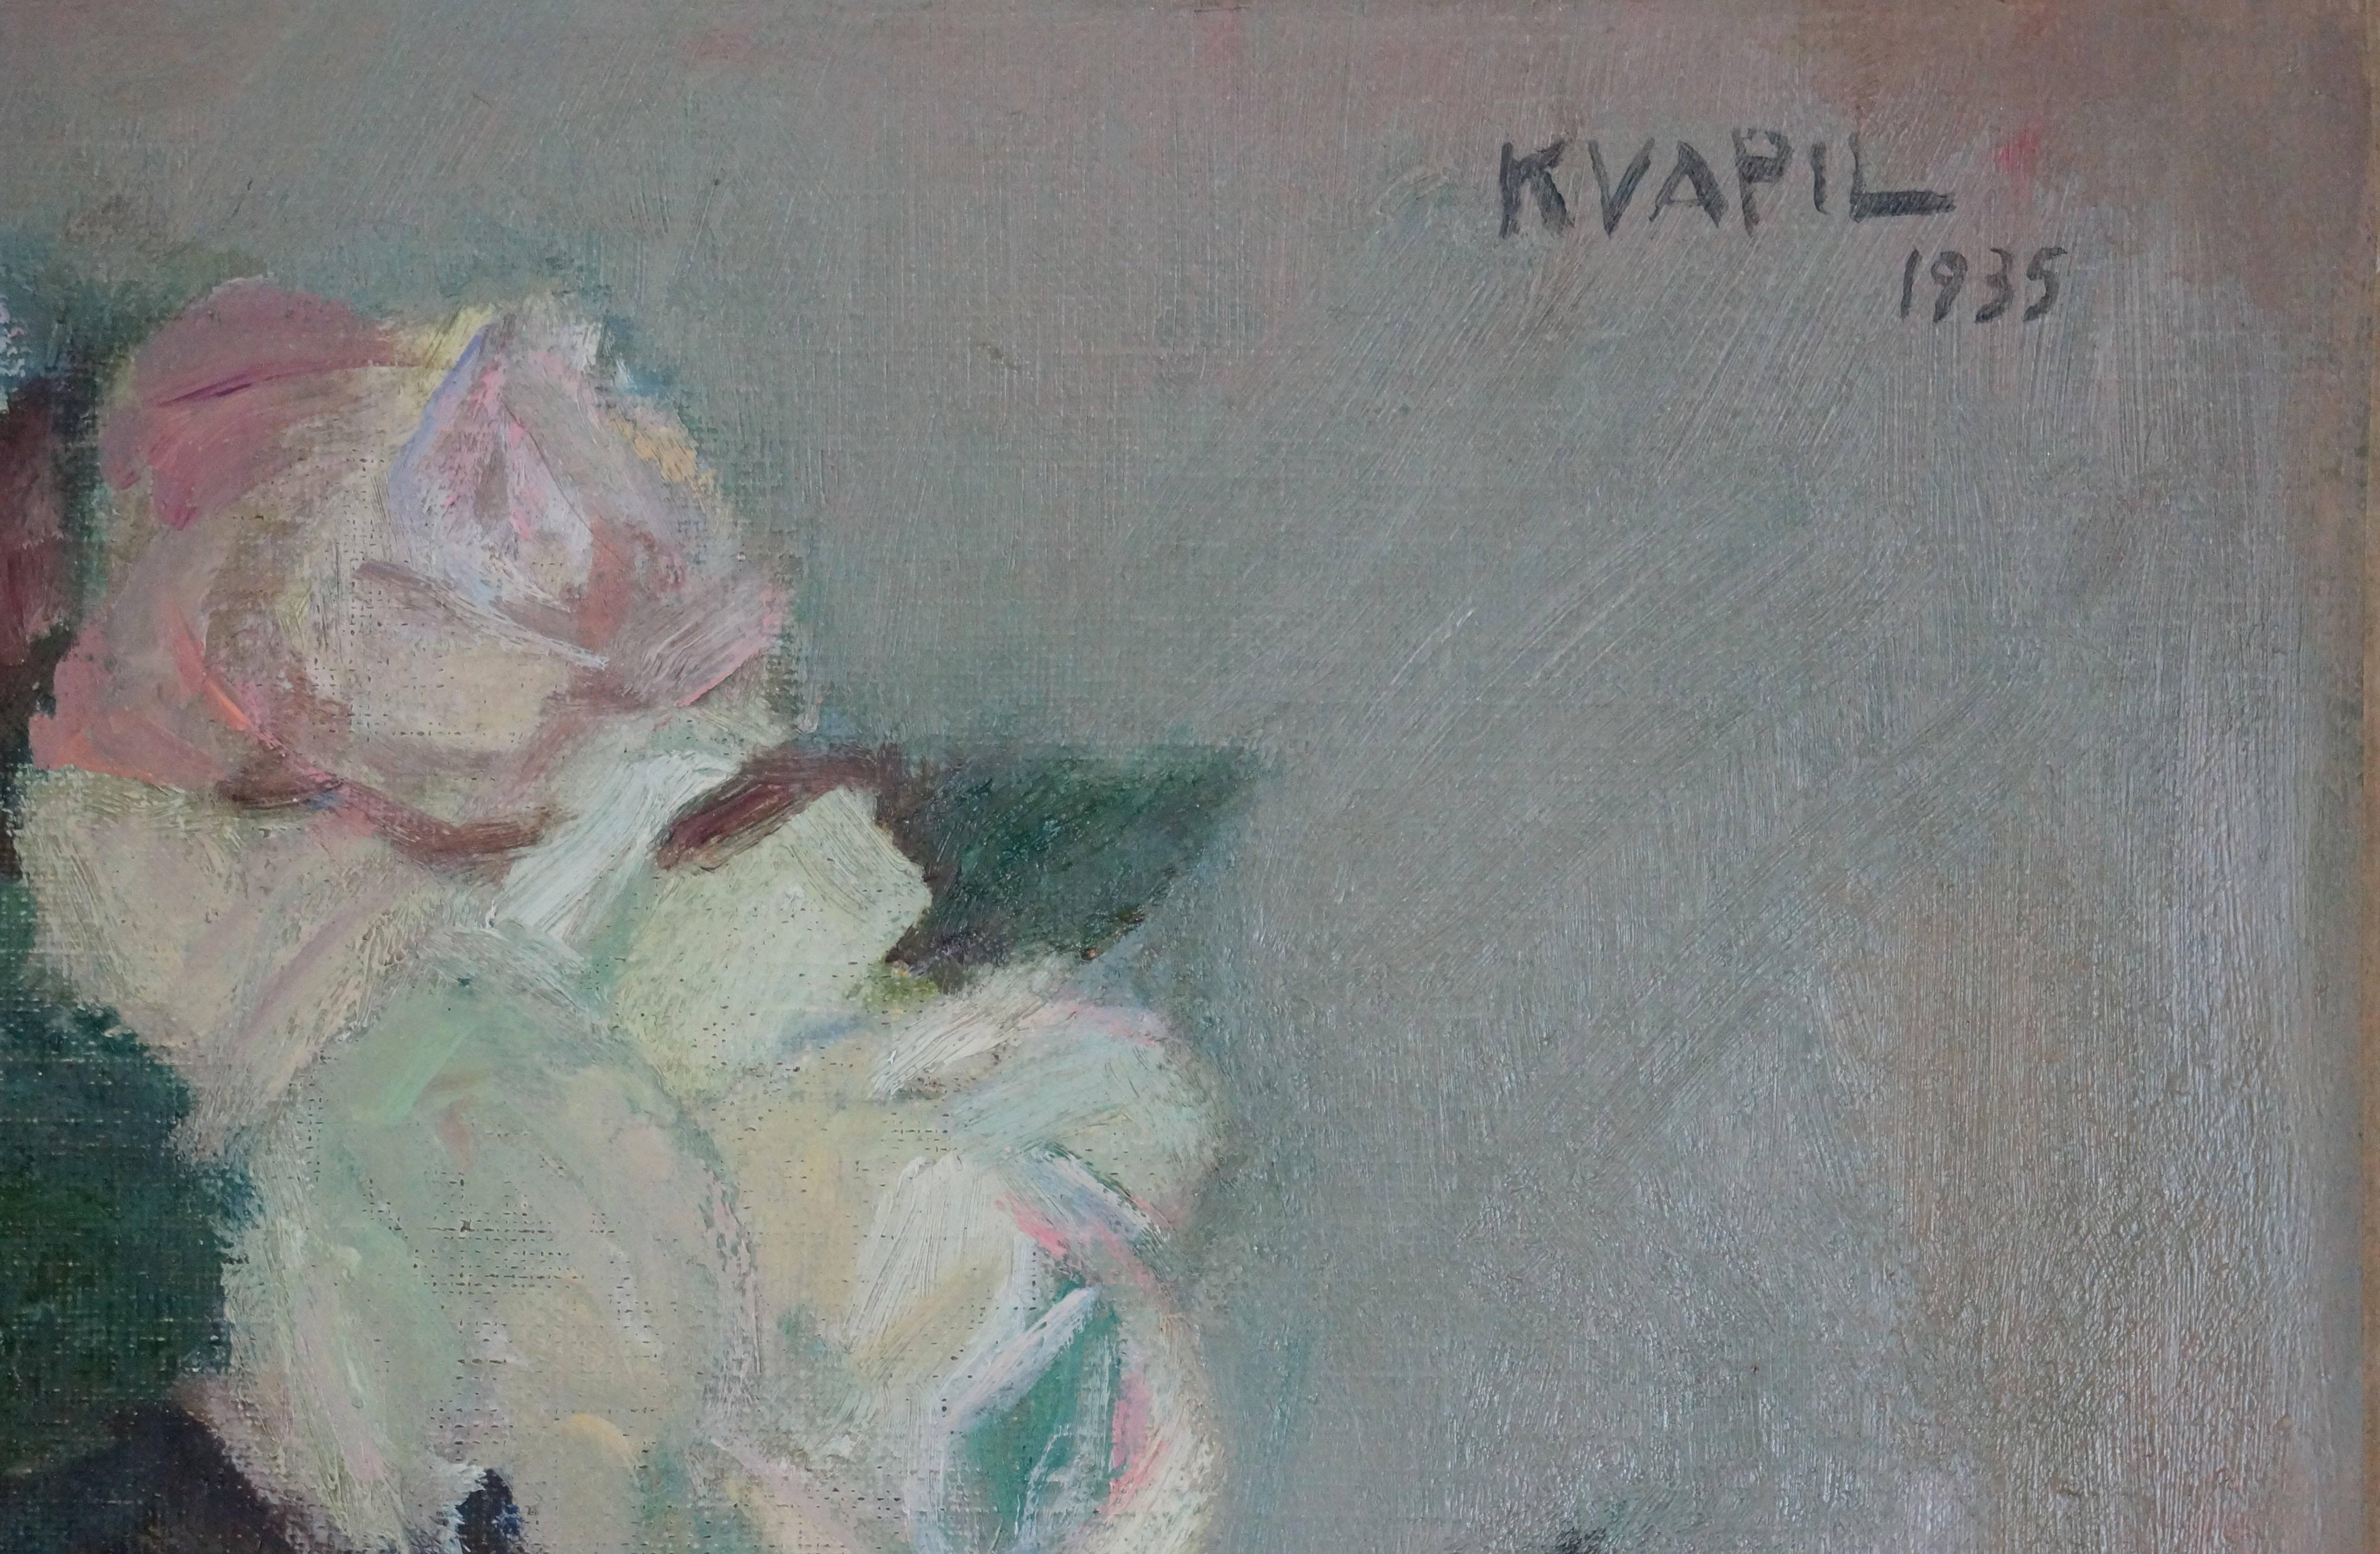 Just Flower, 1935 - oil paint, 33x34 cm, framed - Painting by Charles Kvapil